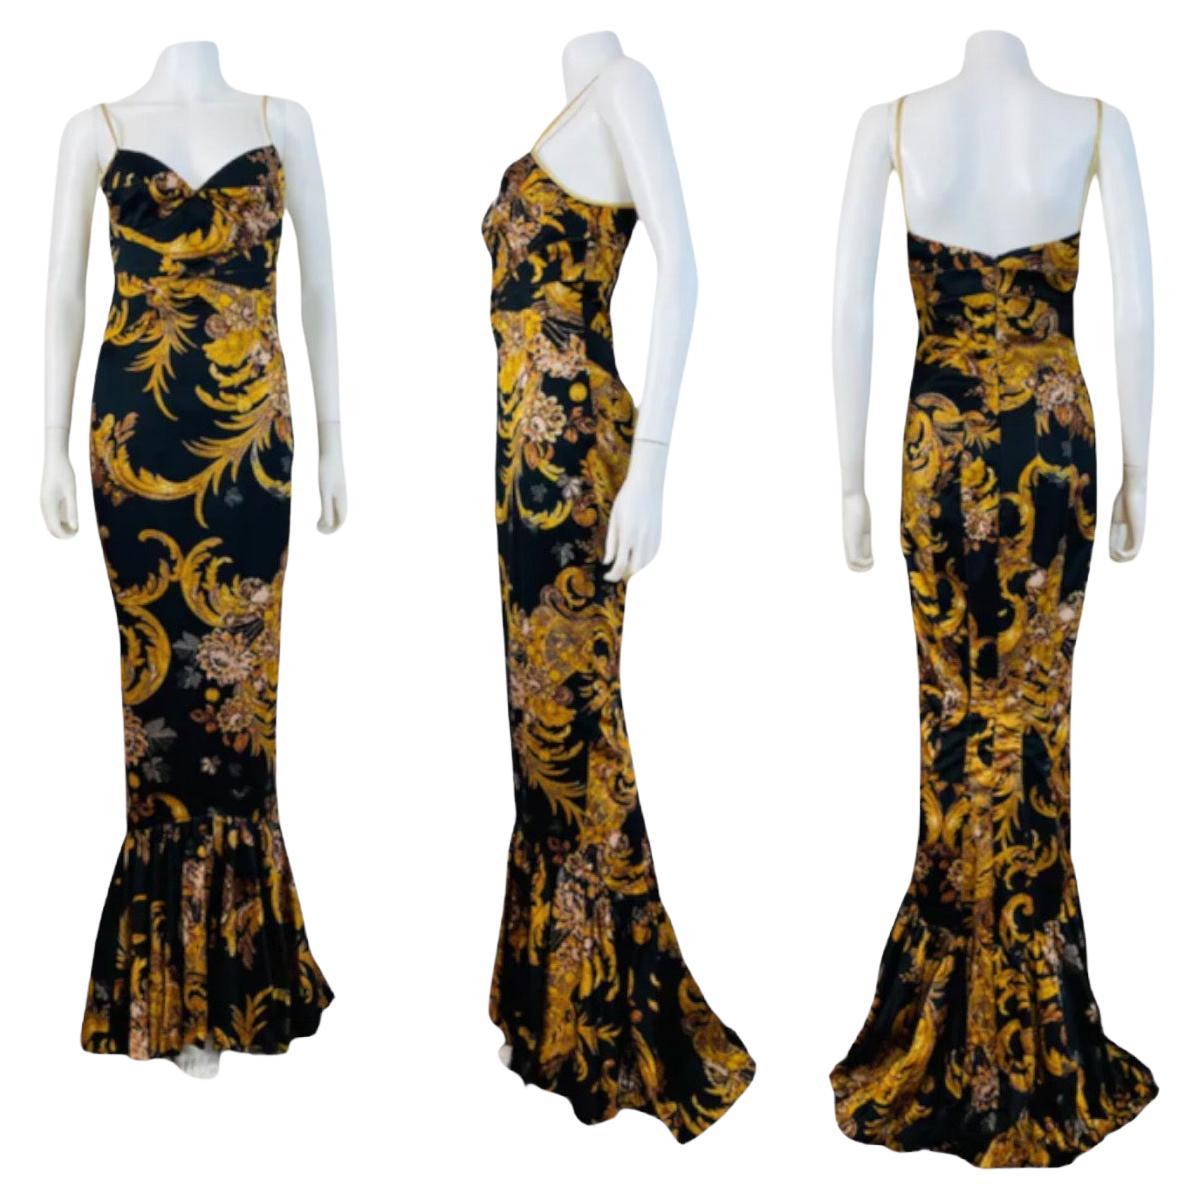 2000s Just Cavalli by Roberto Cavalli Satin Dress Gown
Beautiful baroque print stretch satin fabric
Thin metallic gold shoulder straps
Bras style fitted cup bust
Panel details on the bodice
Maxi length fitted skirt with flared mermaid hem
Open upper